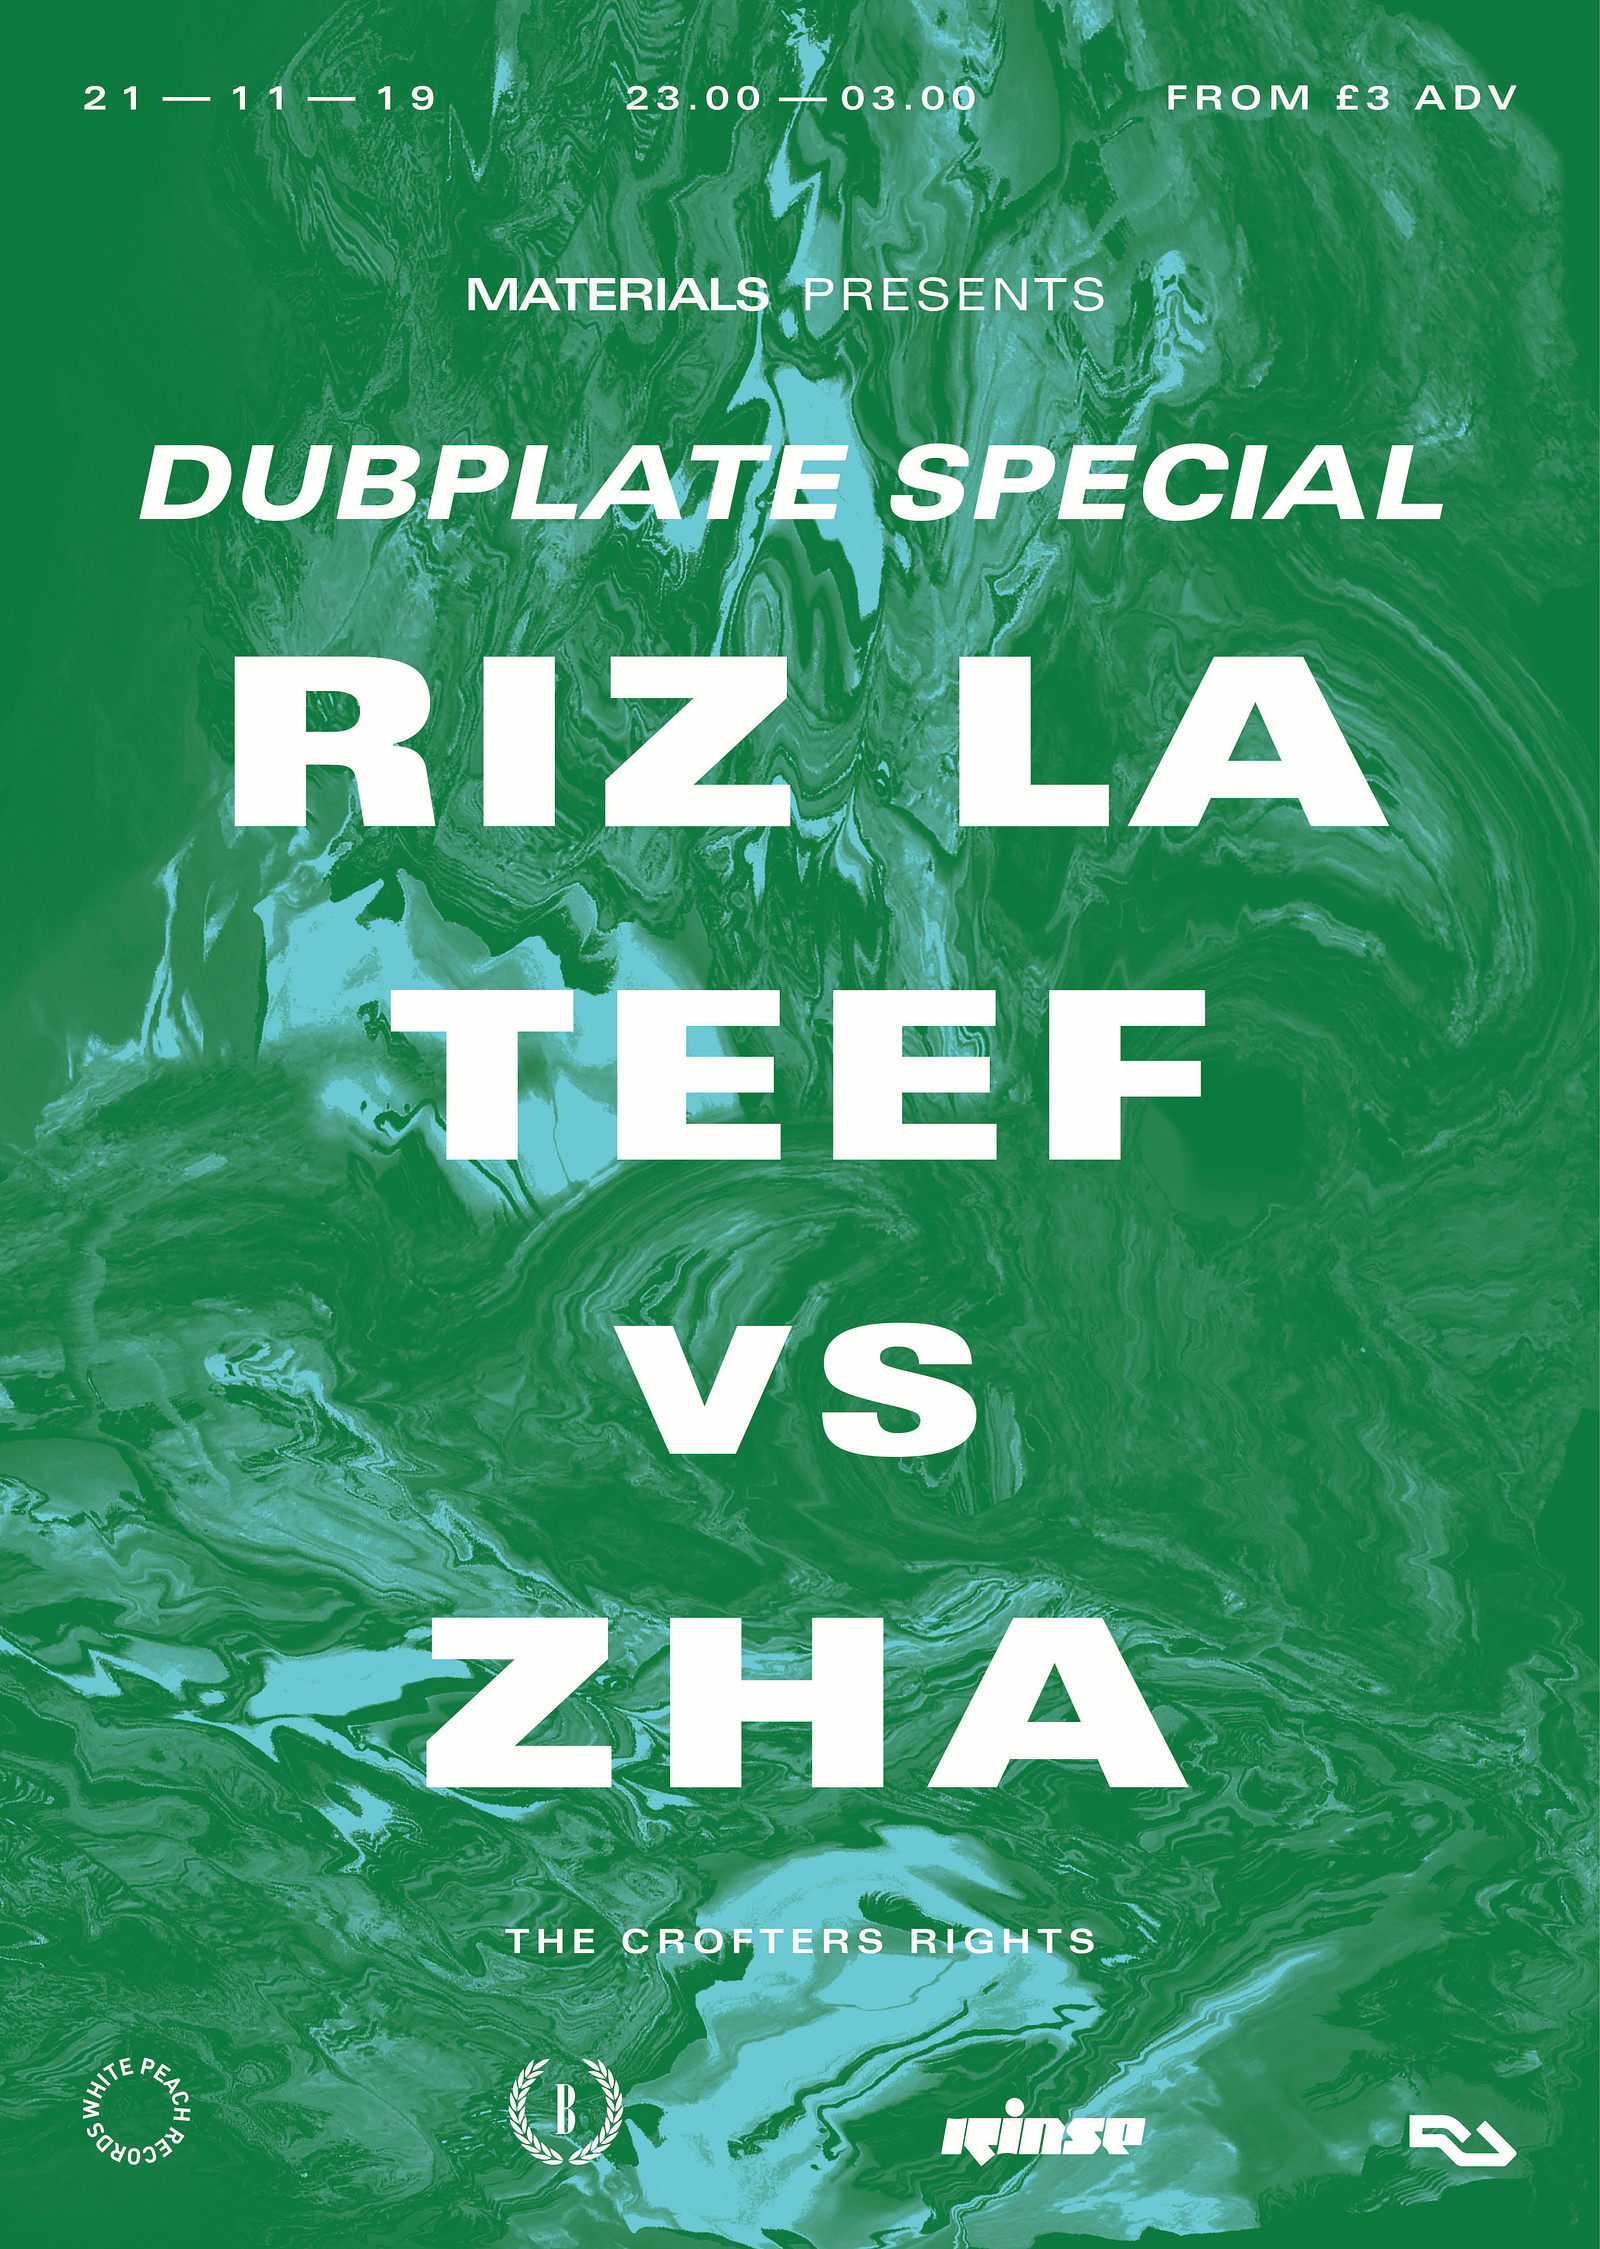 Materials: Dubplate Special *SOLD OUT TIX OTD* at Crofters Rights